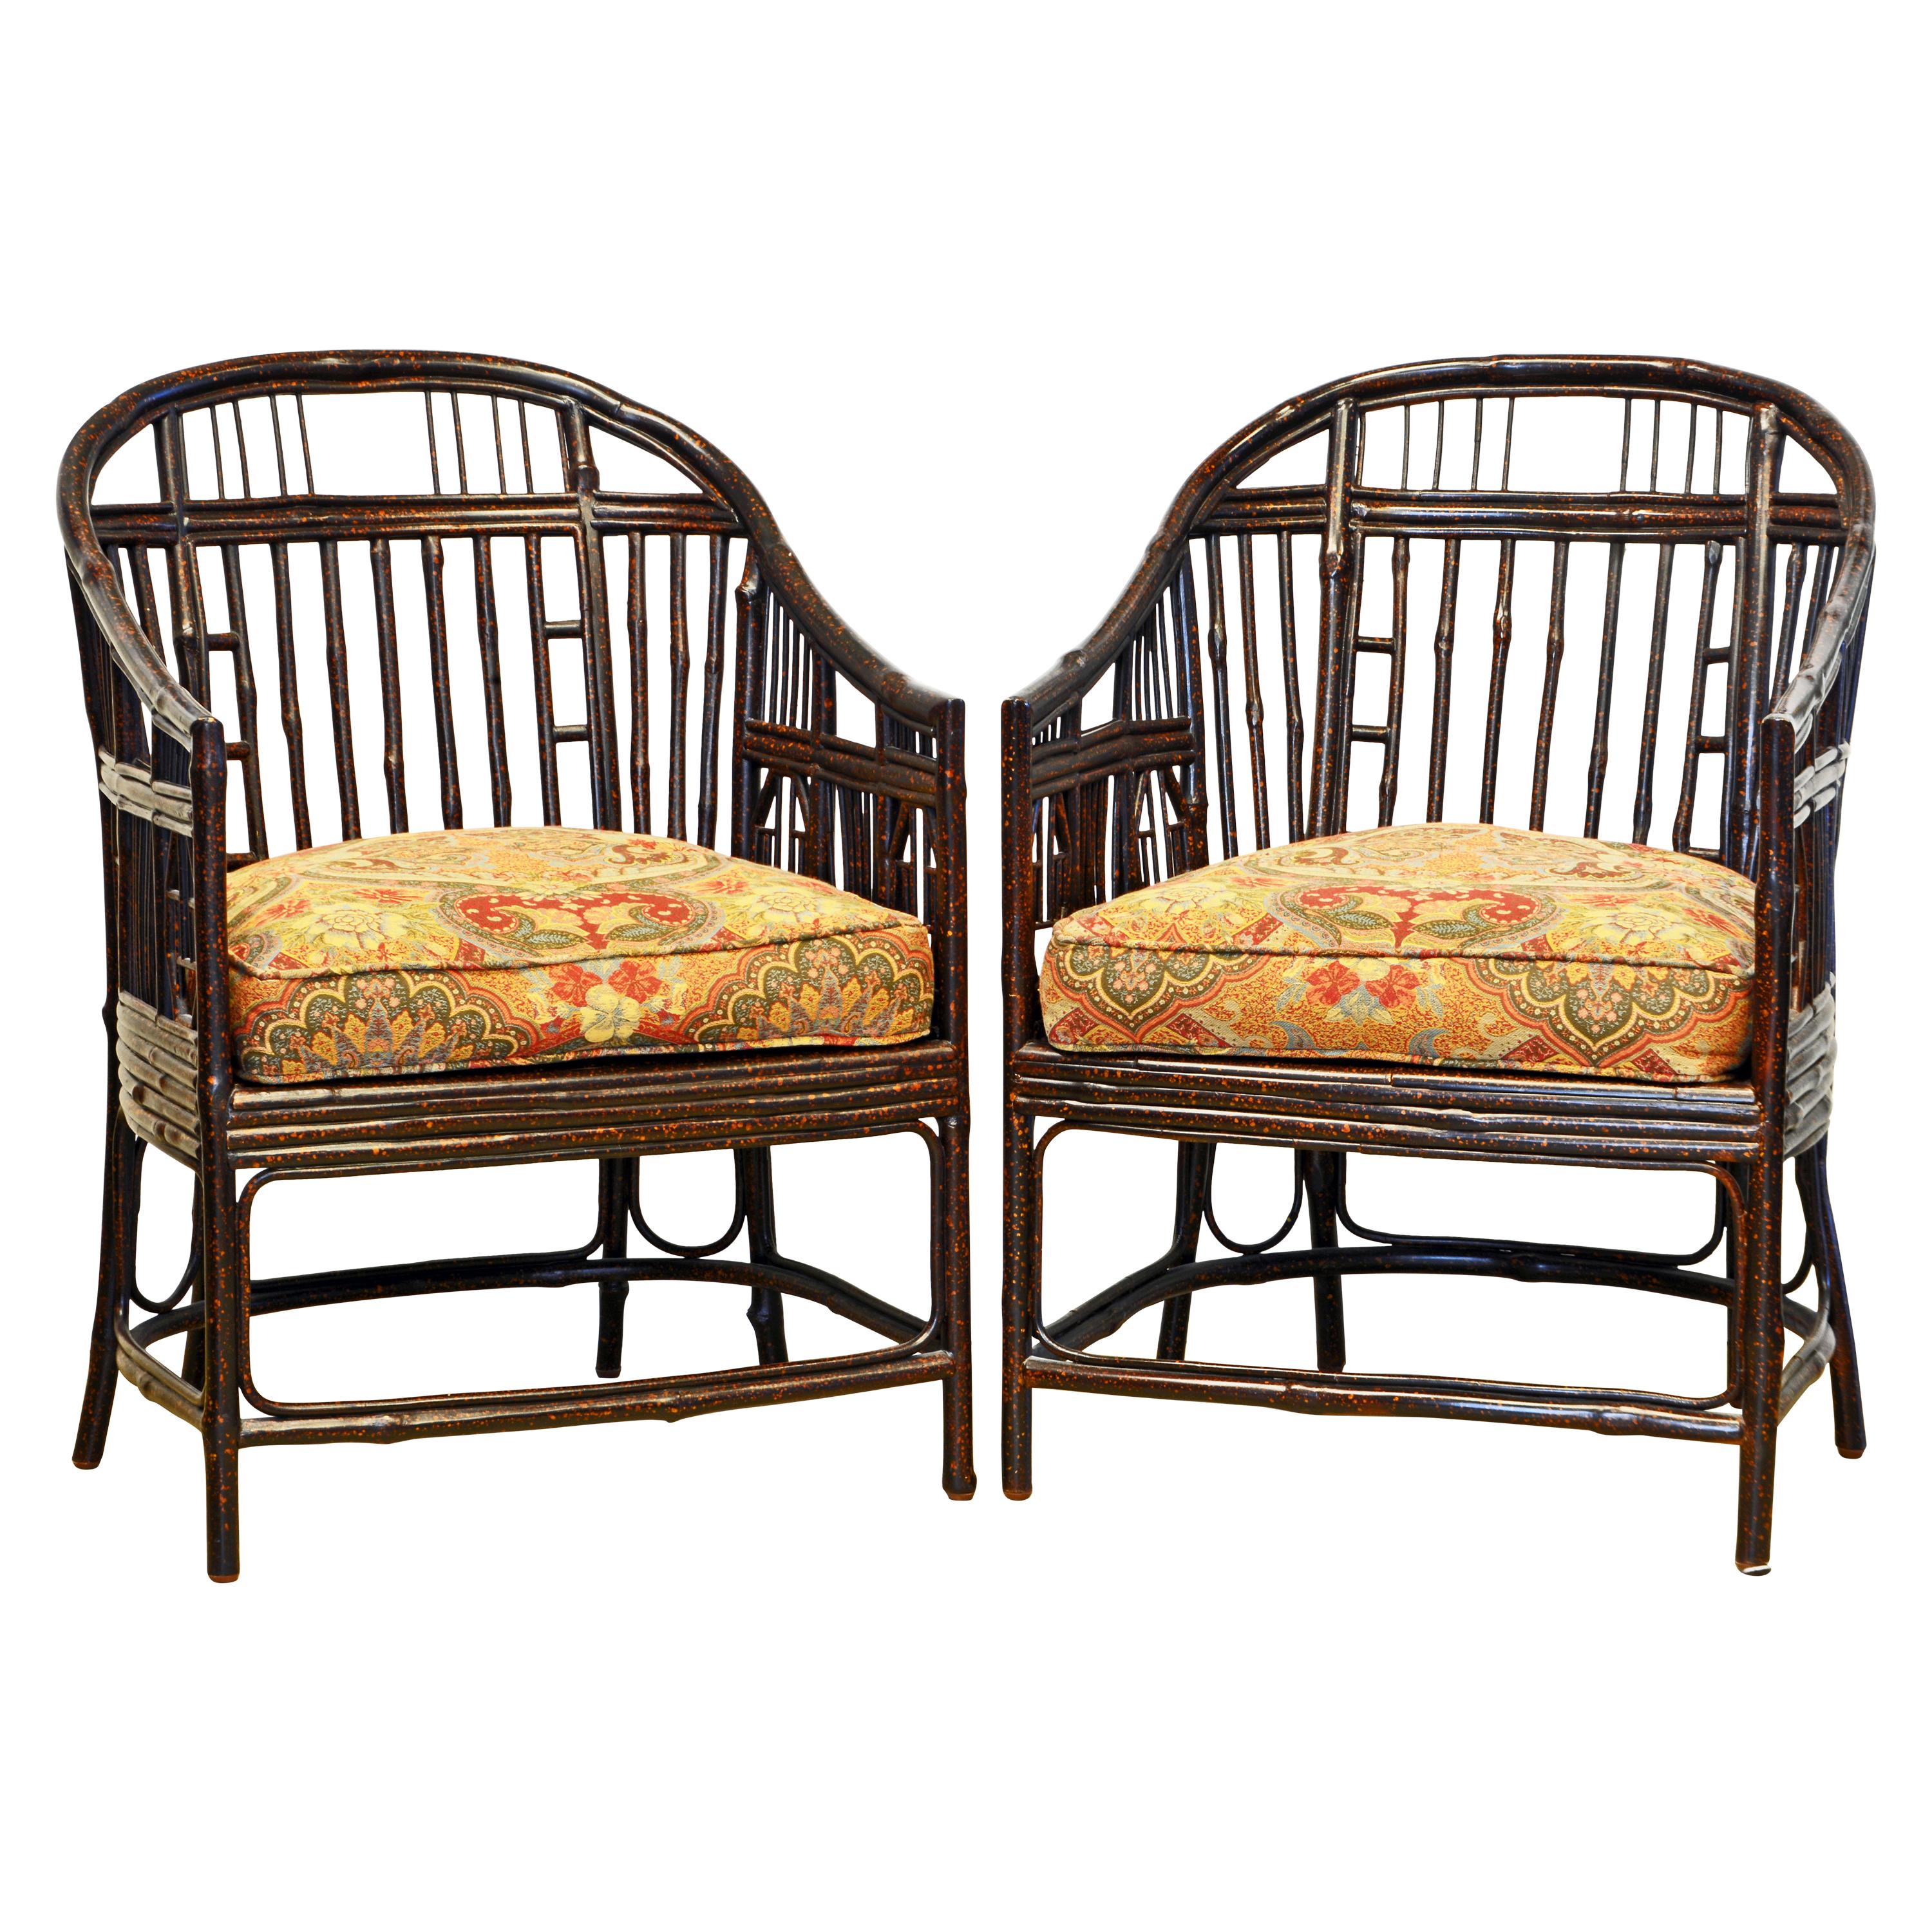 Pair of Brighton Pavillion, Chinoiserie Lacquered Bamboo Chairs, 20th Century